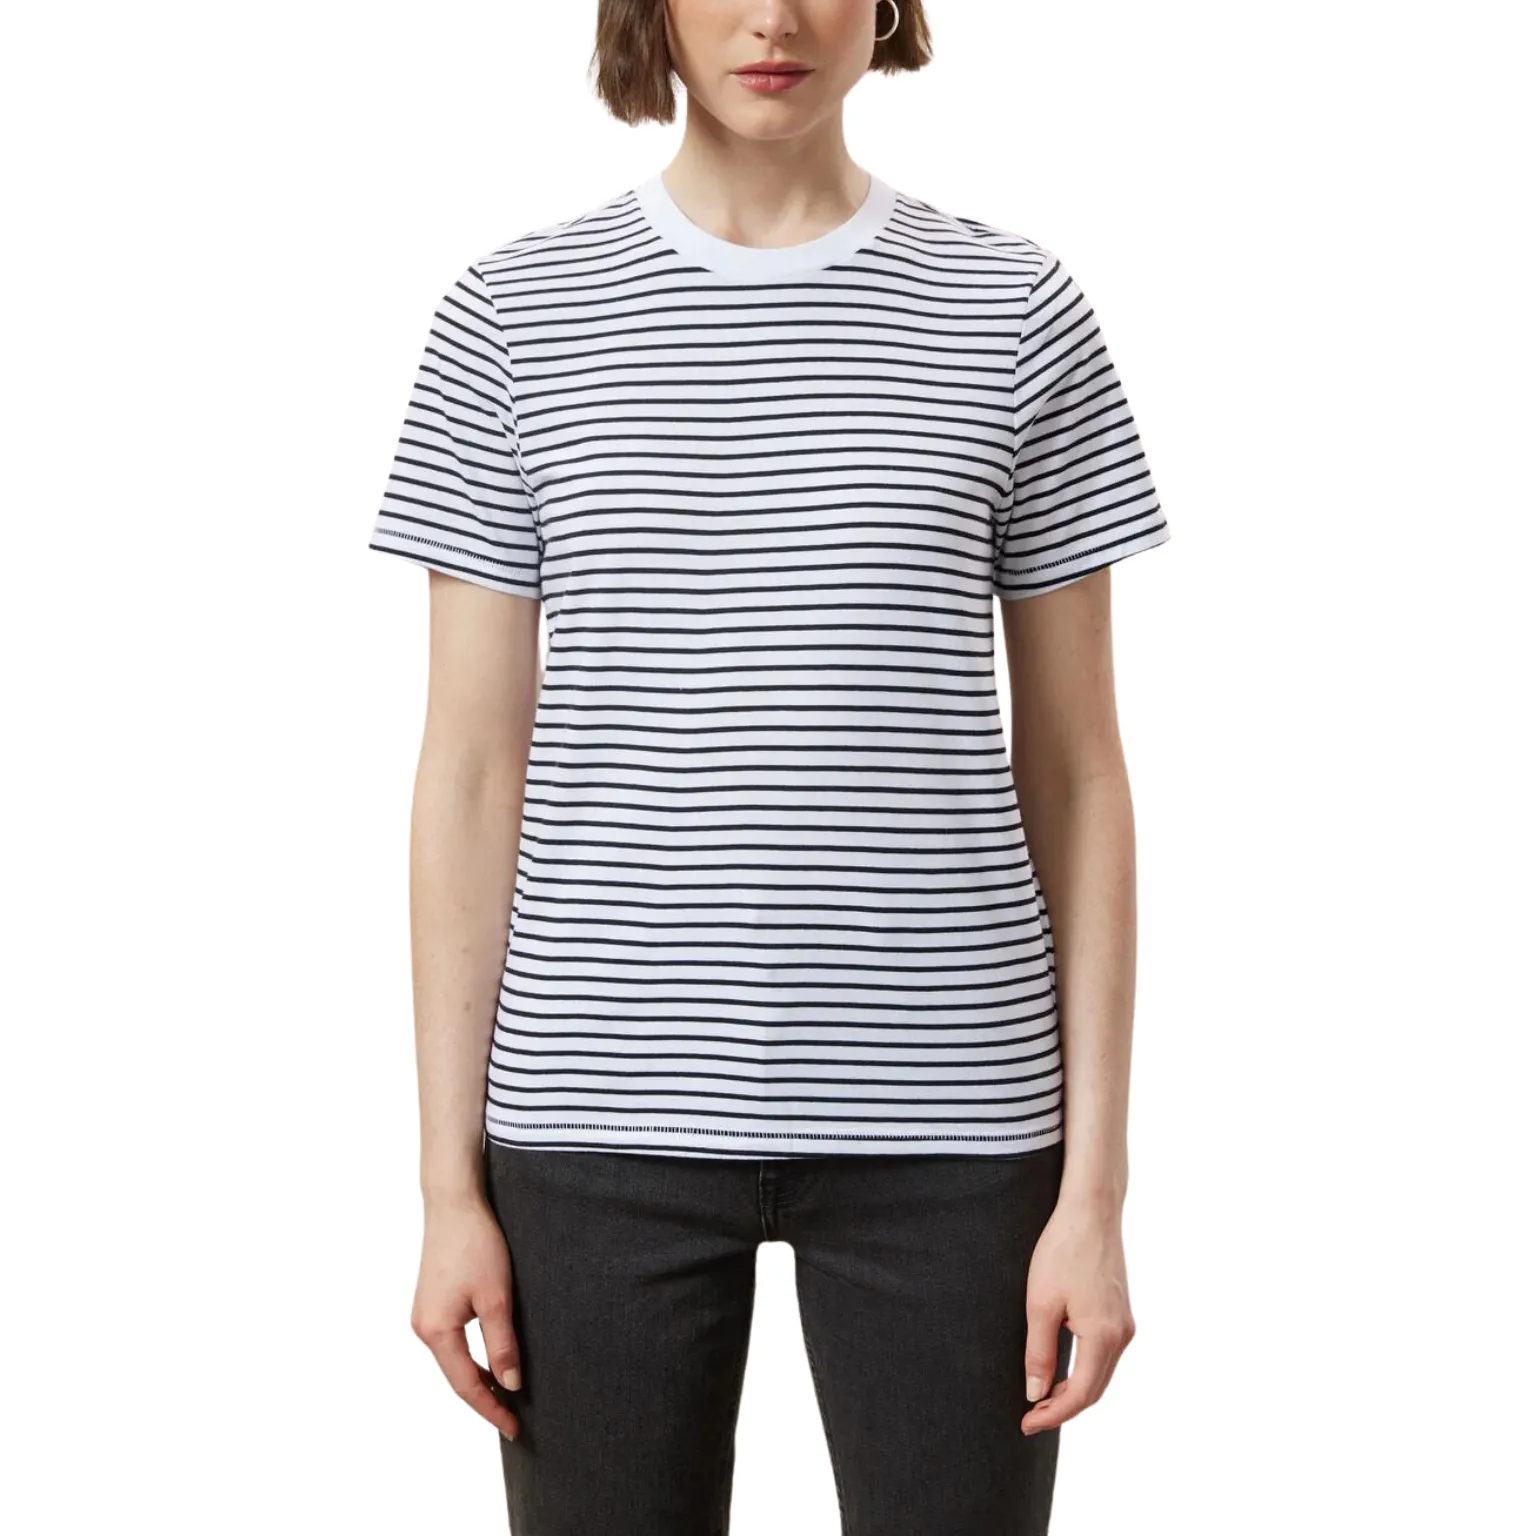 Striped T-shirt manufacturing with recycled materials